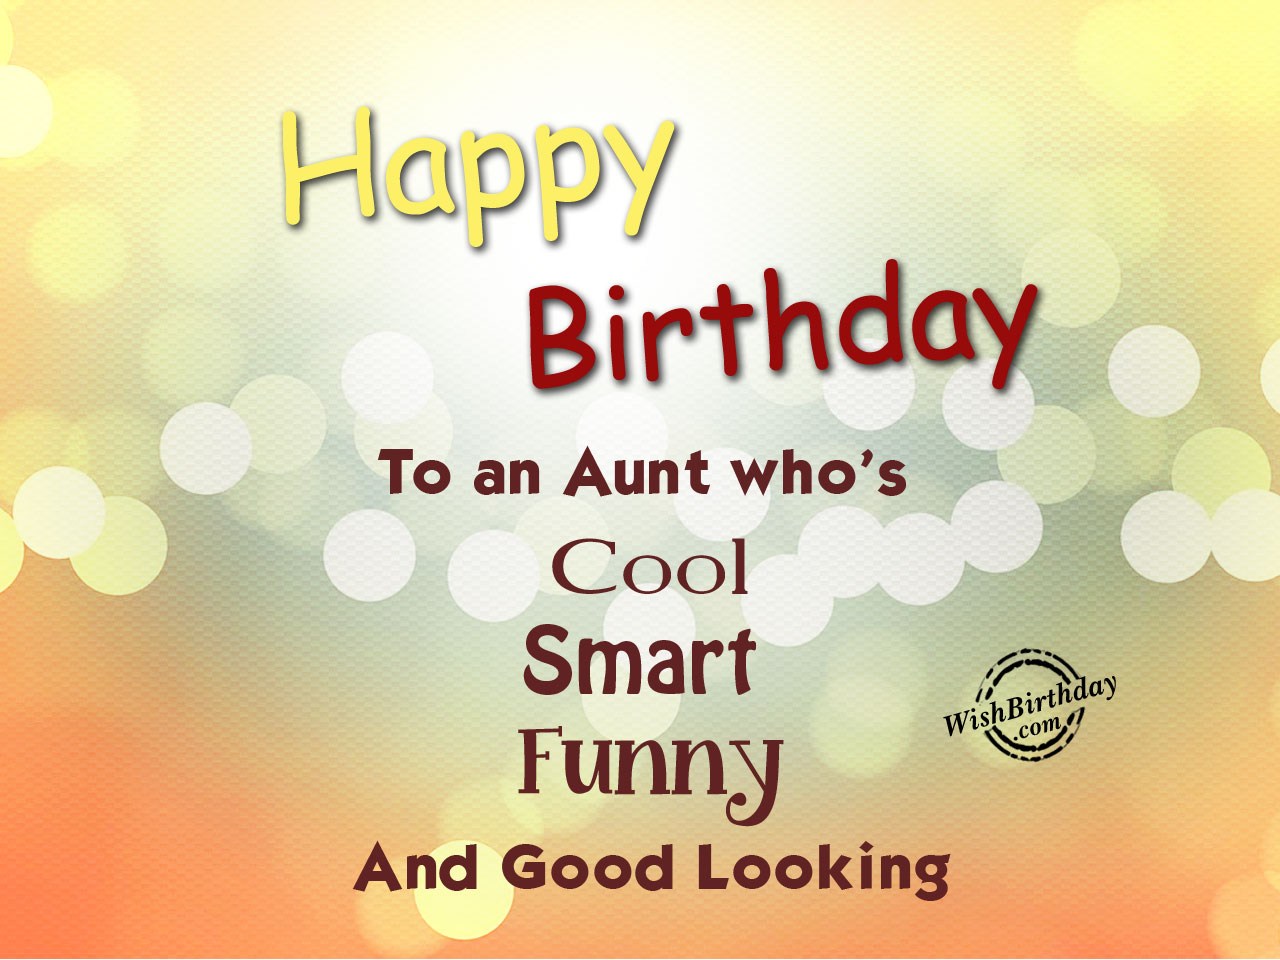 Birthday Wishes For Aunt  Birthday Images, Pictures